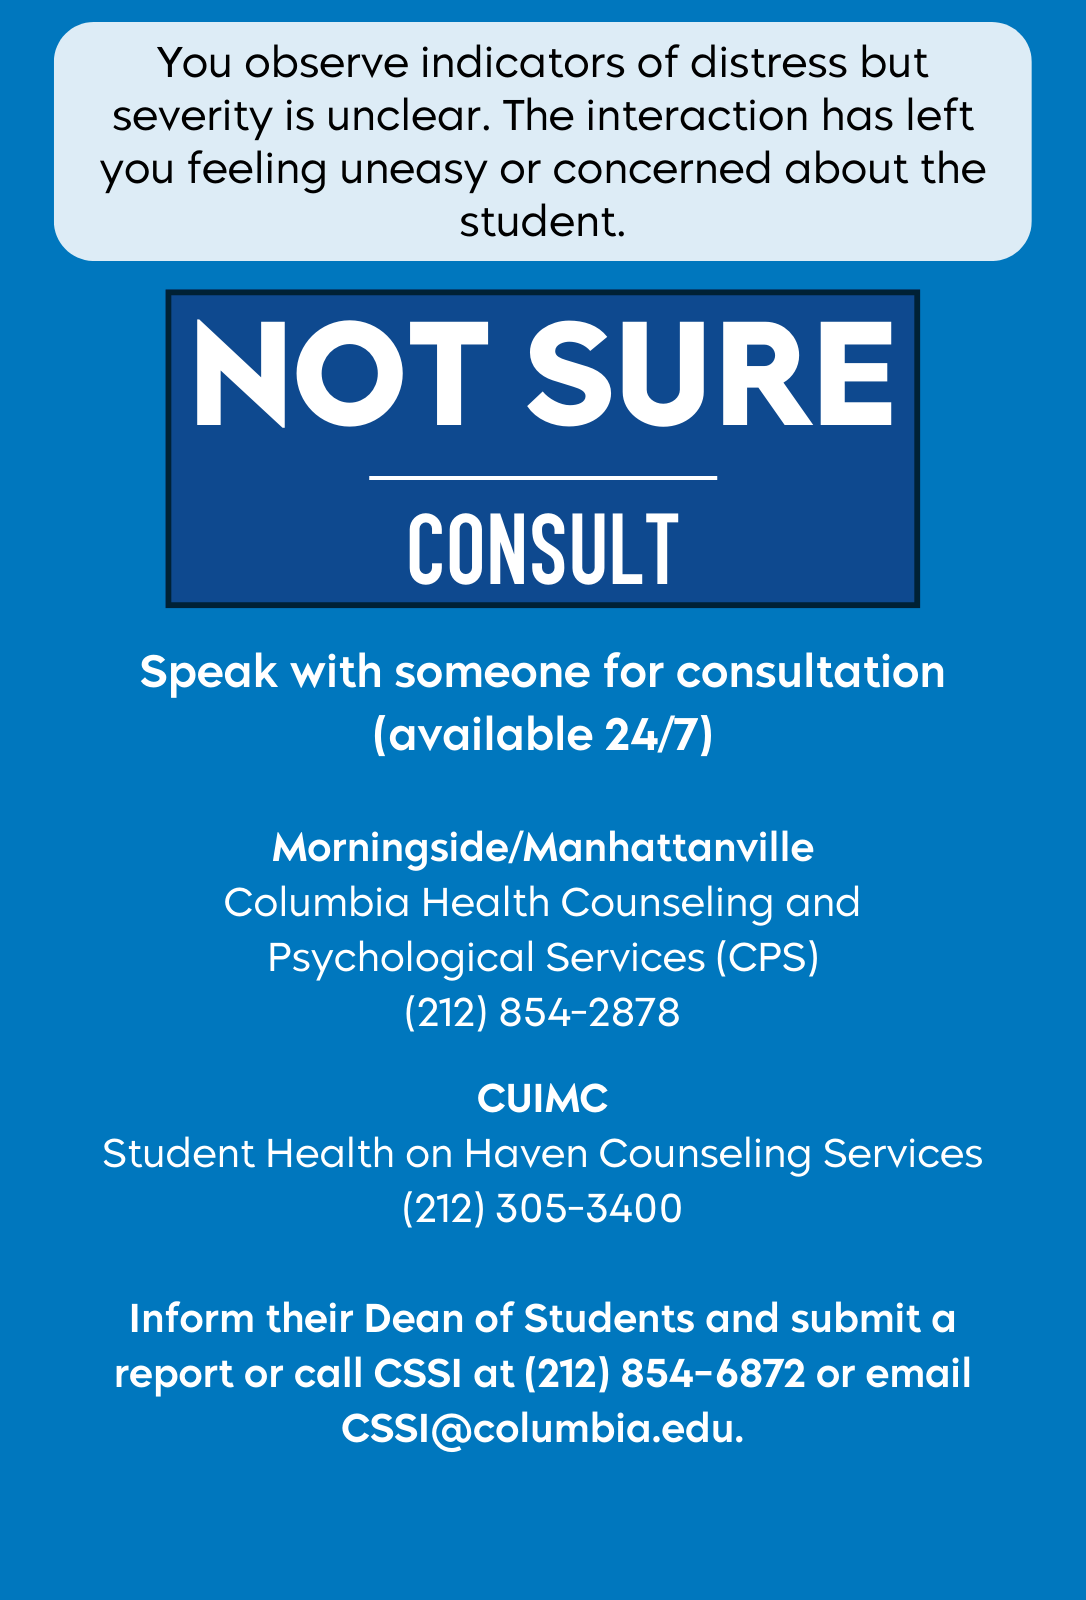 Not Sure - Consult